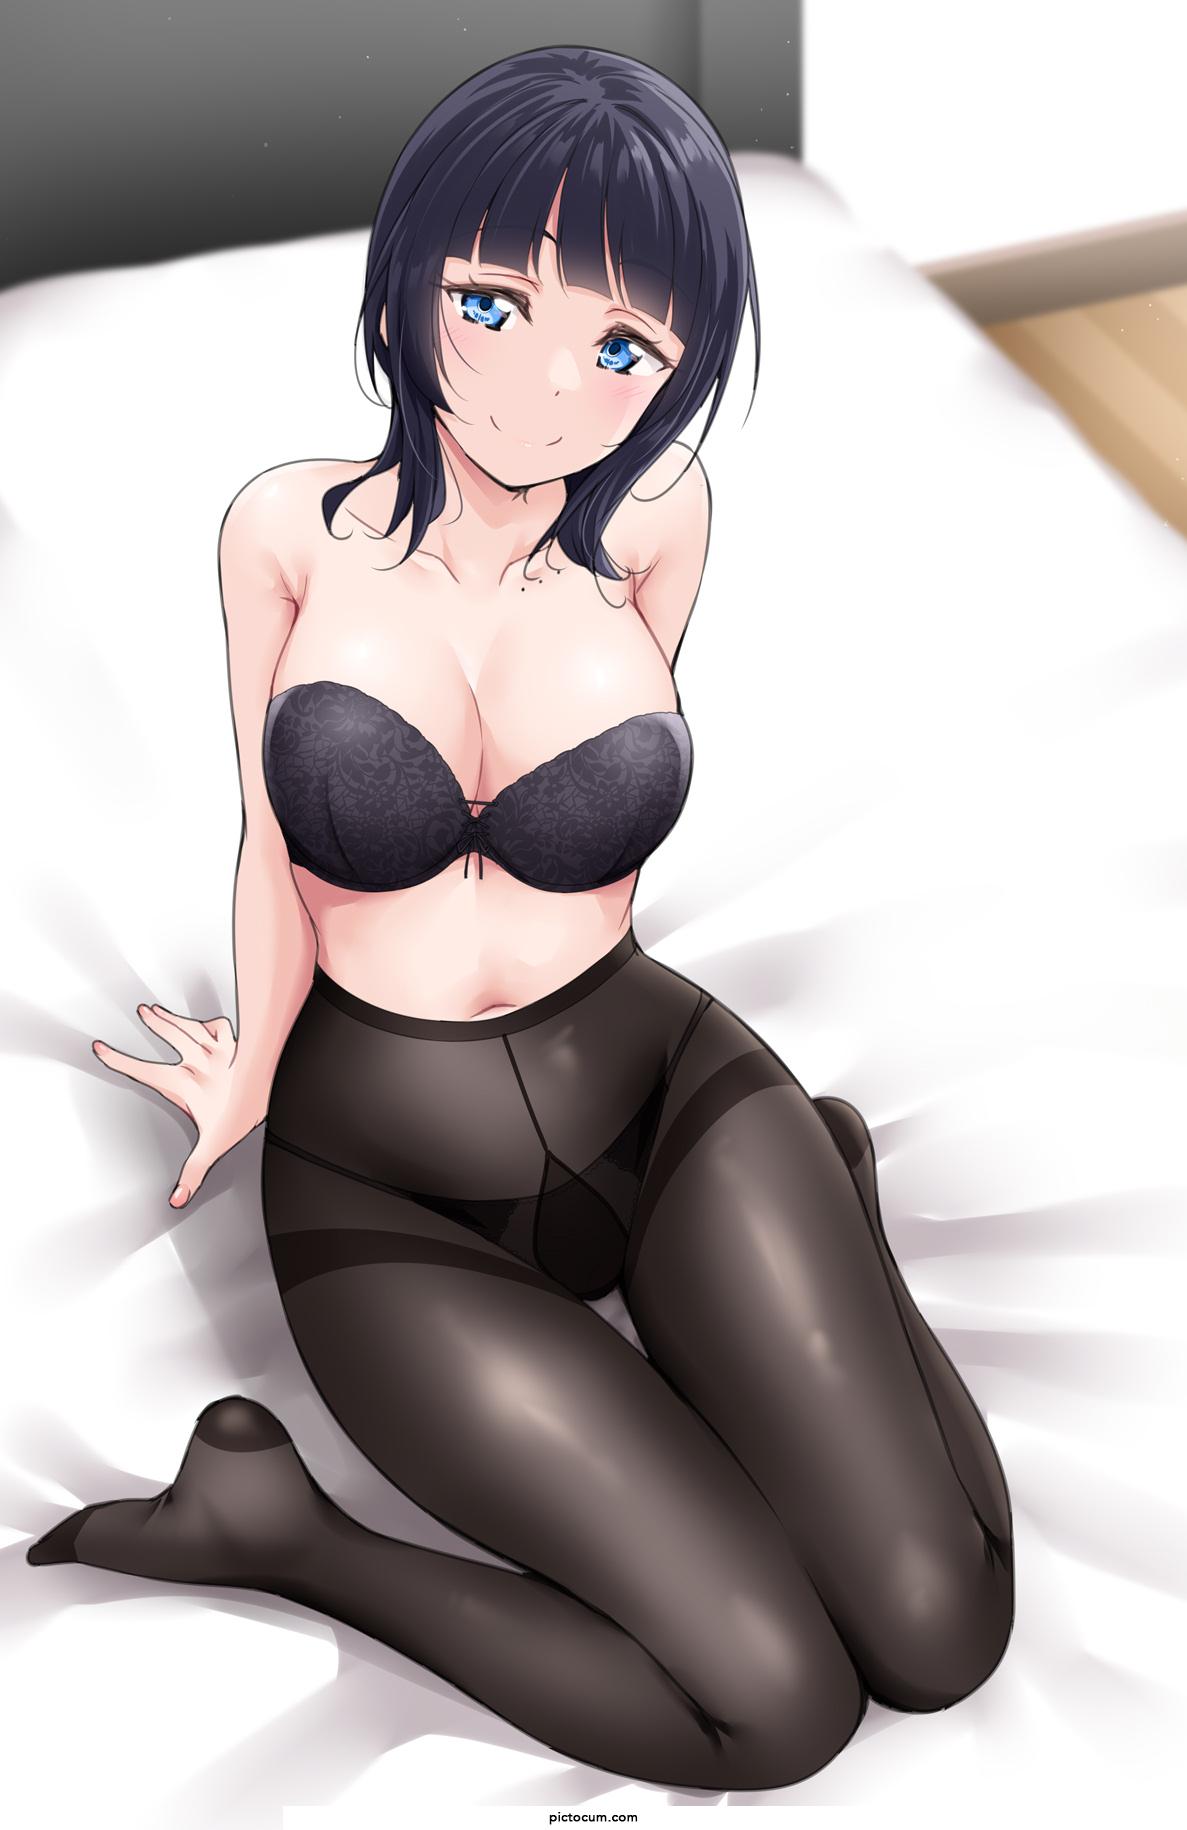 Karin looking cute on the bed